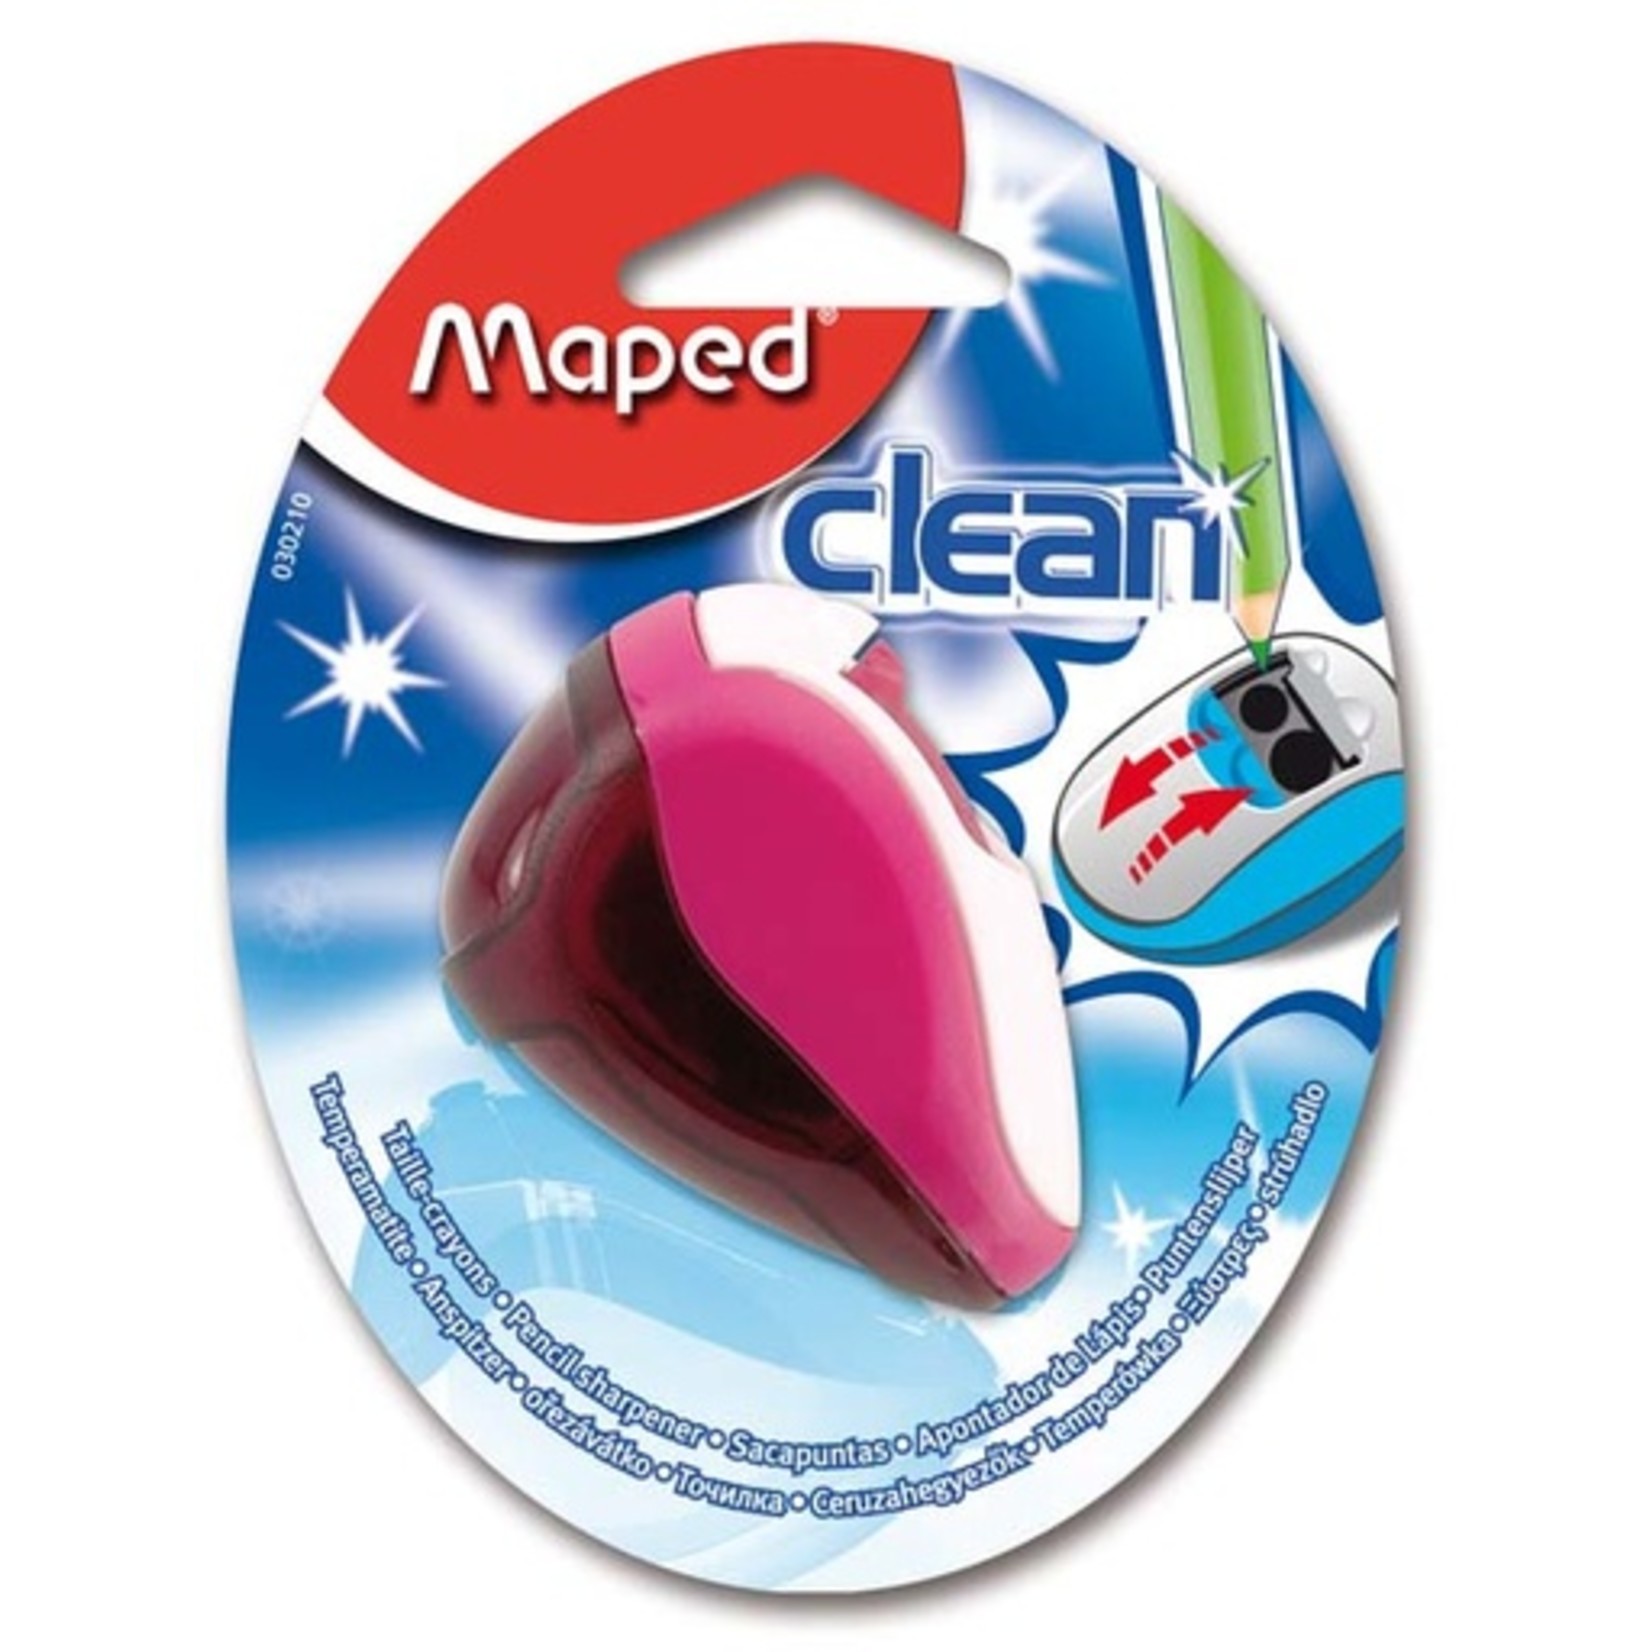 MAPED CLEAN DOUBLE HOLE SHARPENER